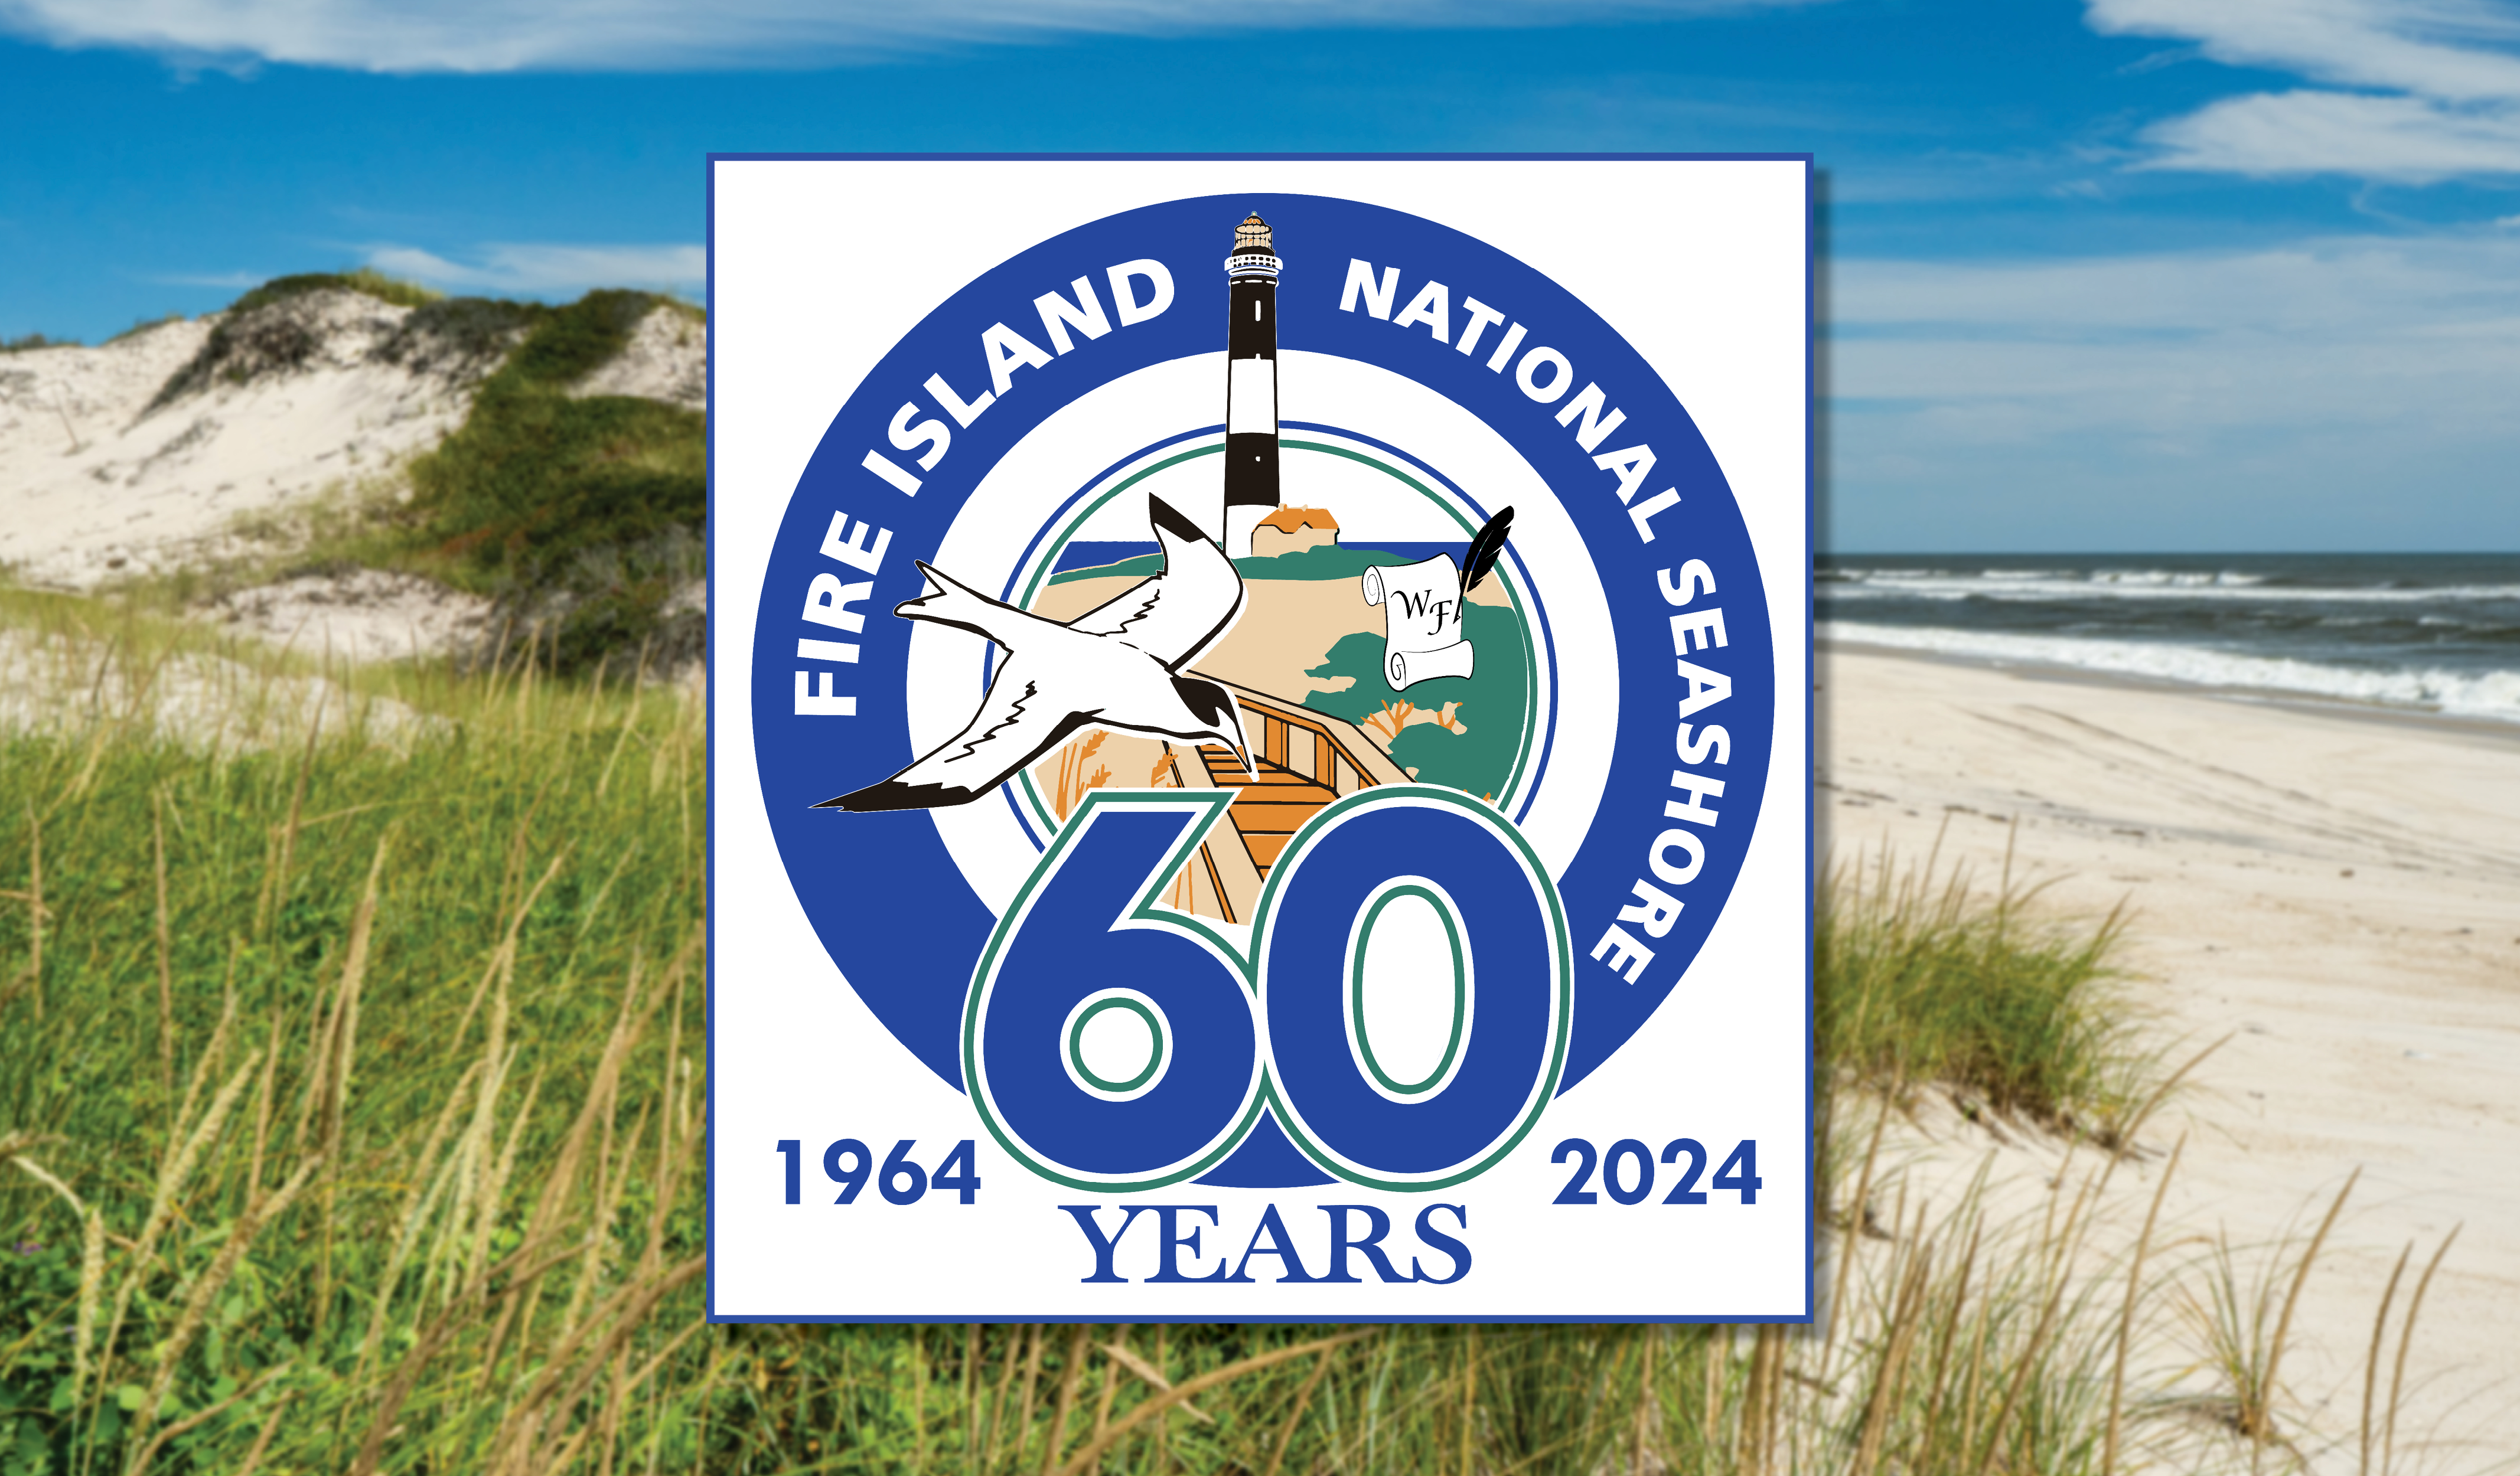 A logo reads "Fire Island National Seashore 60 Years" with a tern, lighthouse, and boardwalk against a beach scene.